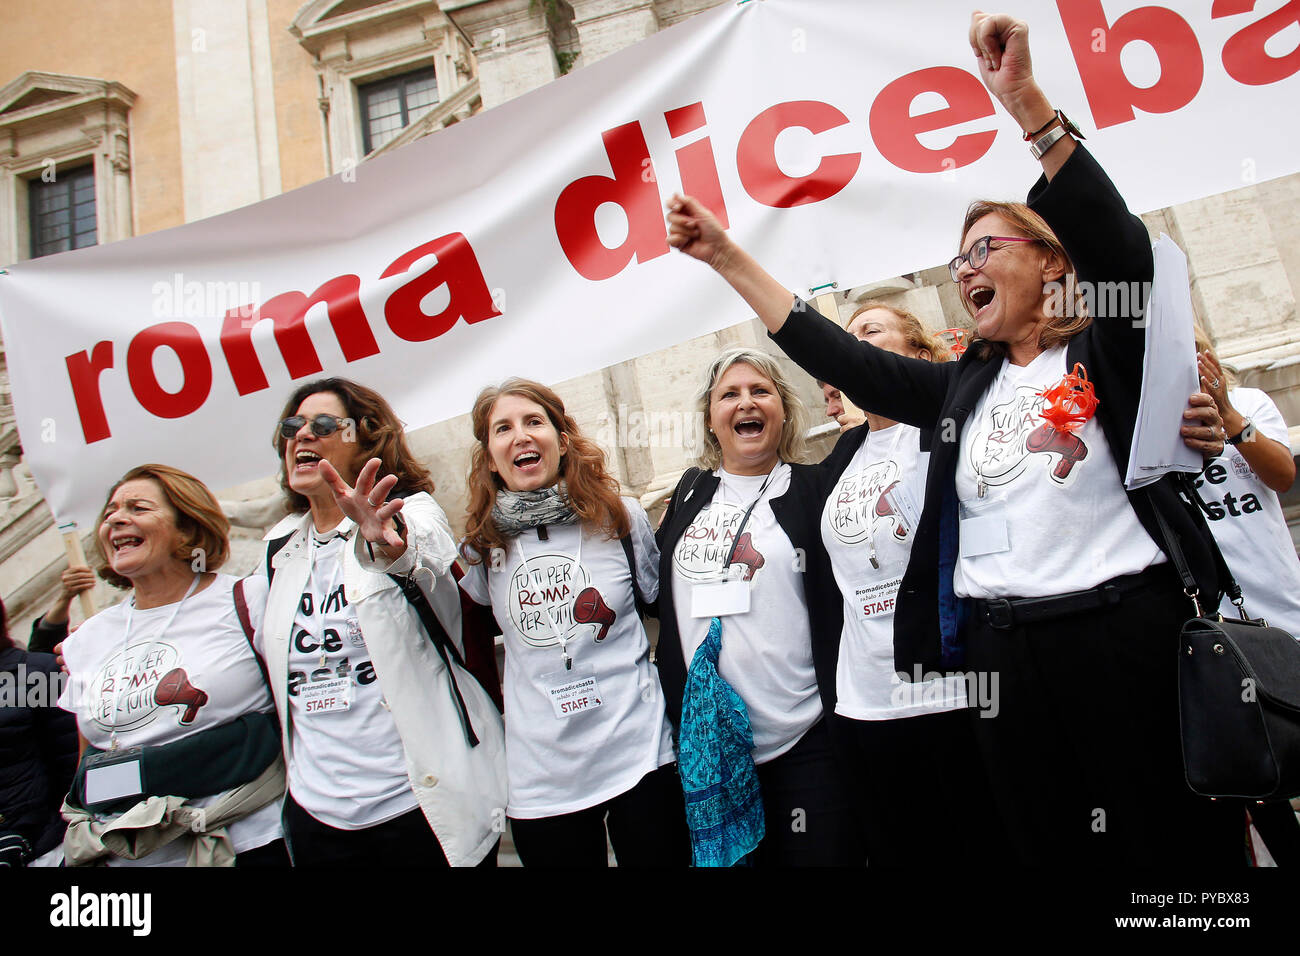 Rome, Italy. 27th Oct, 2018. Banner Rome says stop and the 6 women promoters of the demonstration Rome October 27th 2018. Campidoglio Square. Demonstration of roman citizens agains the mayor and against the deterioration and the huge problems that have been afflicting Rome during the last months, like garbage, carelessness and huge and dangerous holes in the streets. The sit-in was organized by 6 women that created the movement 'Rome says Stop'. Foto Samantha Zucchi Insidefoto Credit: insidefoto srl/Alamy Live News Stock Photo